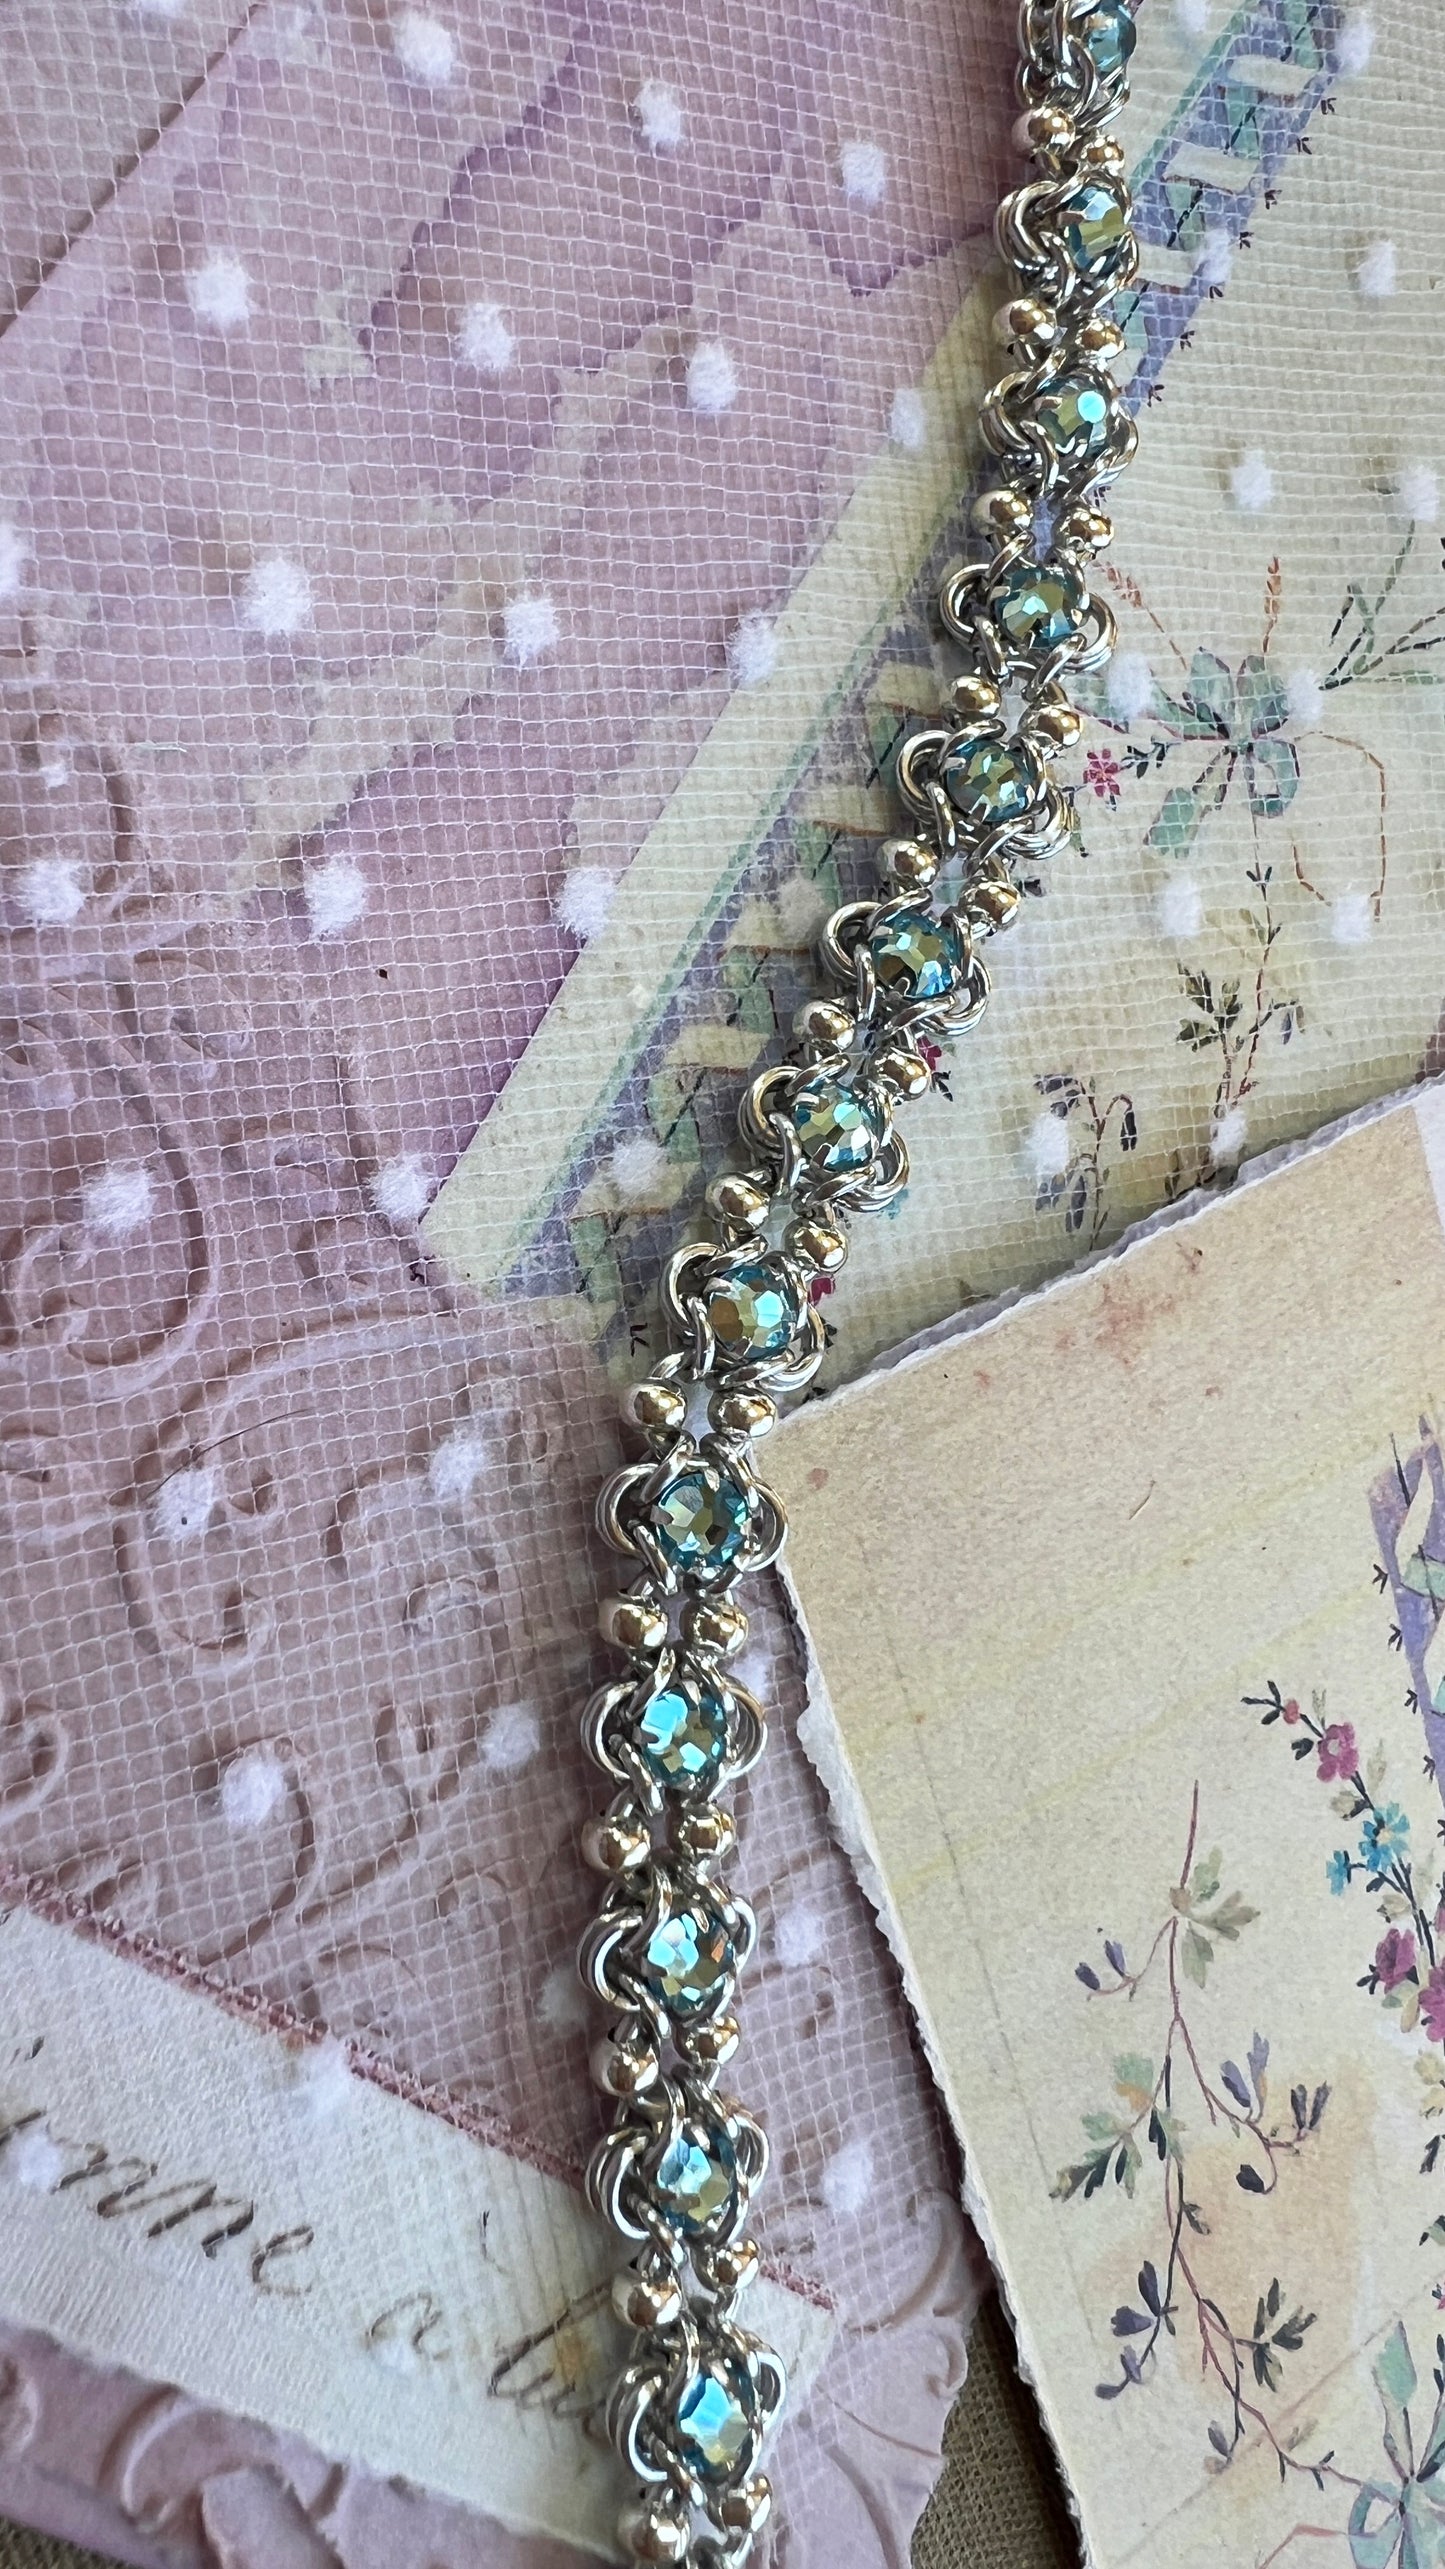 Reversible Rose Montee Beaded Bracelet PDF Tutorial & Video Class -no physical items included